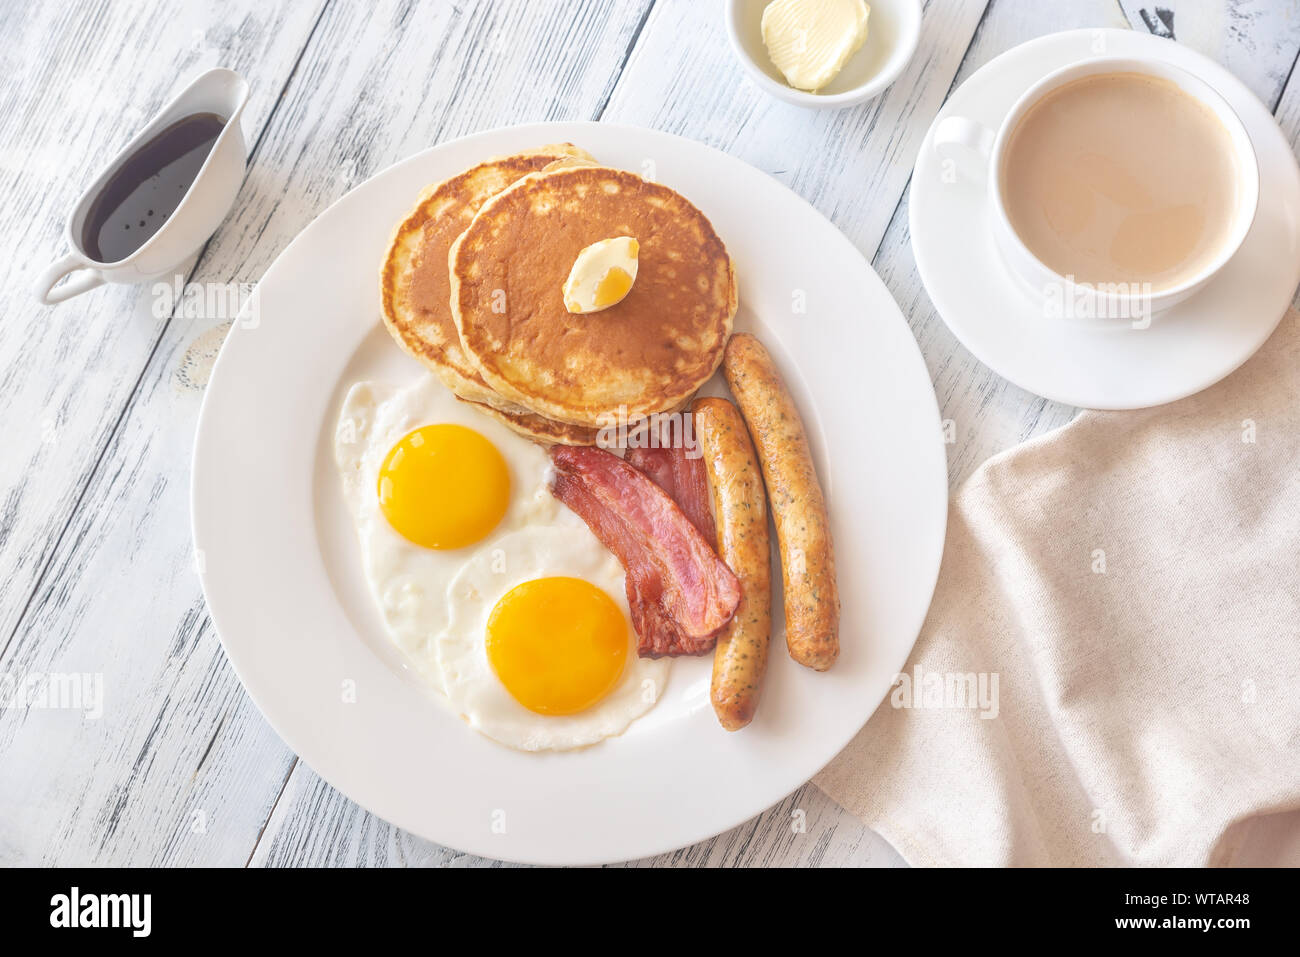 Portion of traditional American breakfast with a cup of coffee Stock Photo